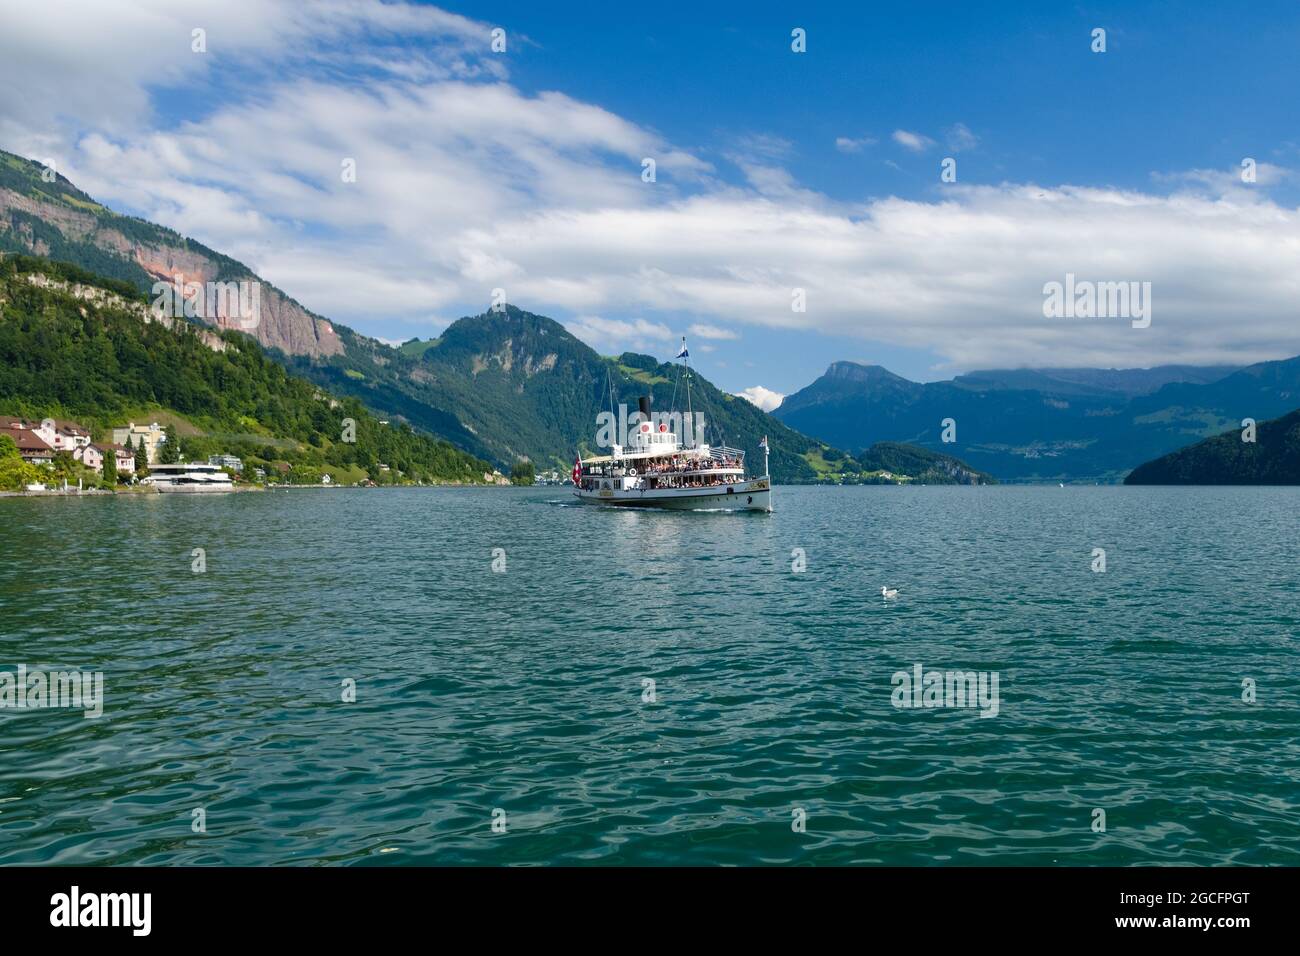 Sunny view of the old wheeled boat sailing near the village of Weggis facing the lake of Luzern with the Swiss mountains in the background Stock Photo